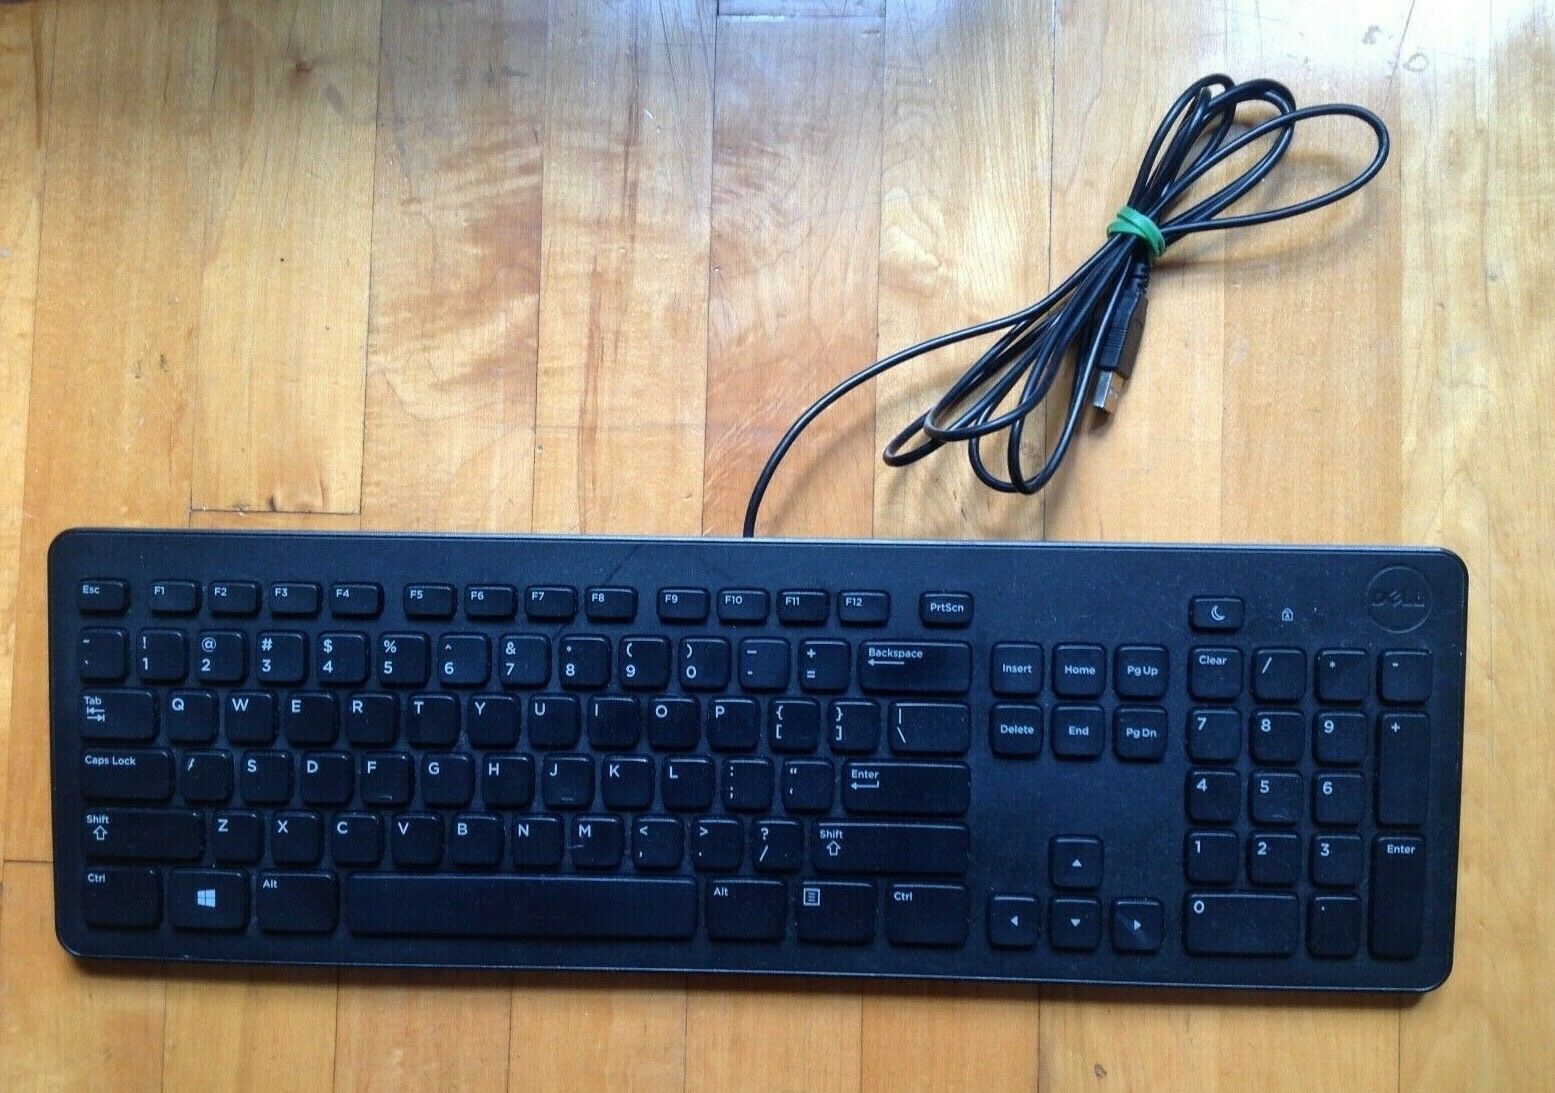 Primary image for Dell Keyboard Model KB113p USB Wired Slim Black Computer Keyboard